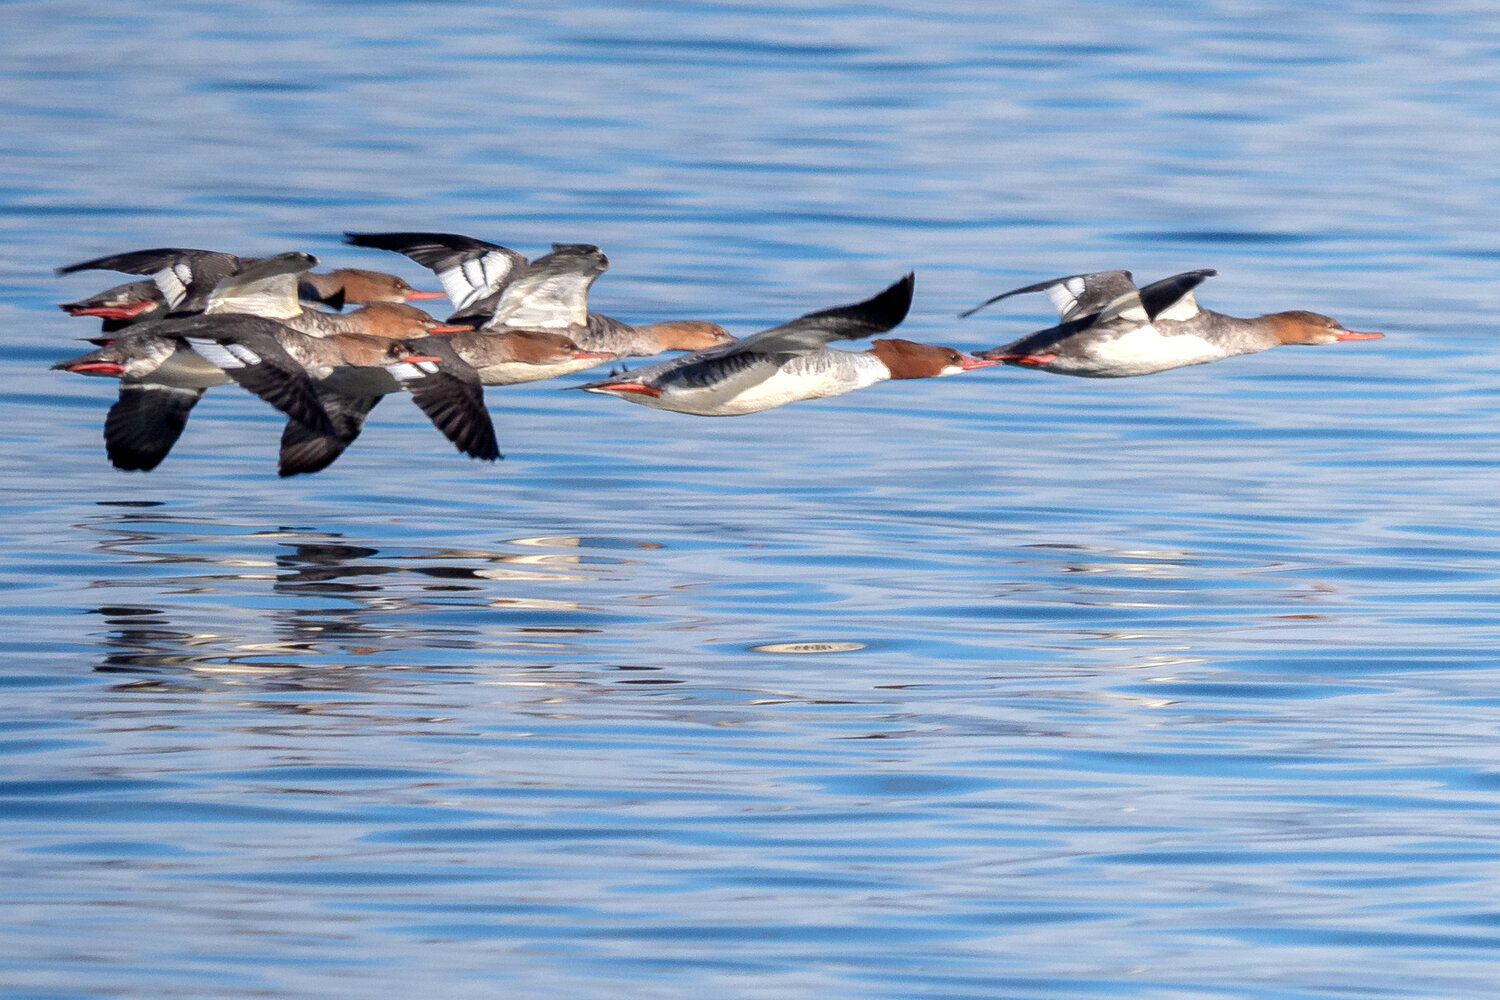 A female common merganser (center) can be told from the red-breasted mergansers around her by her distinct white chin patch.